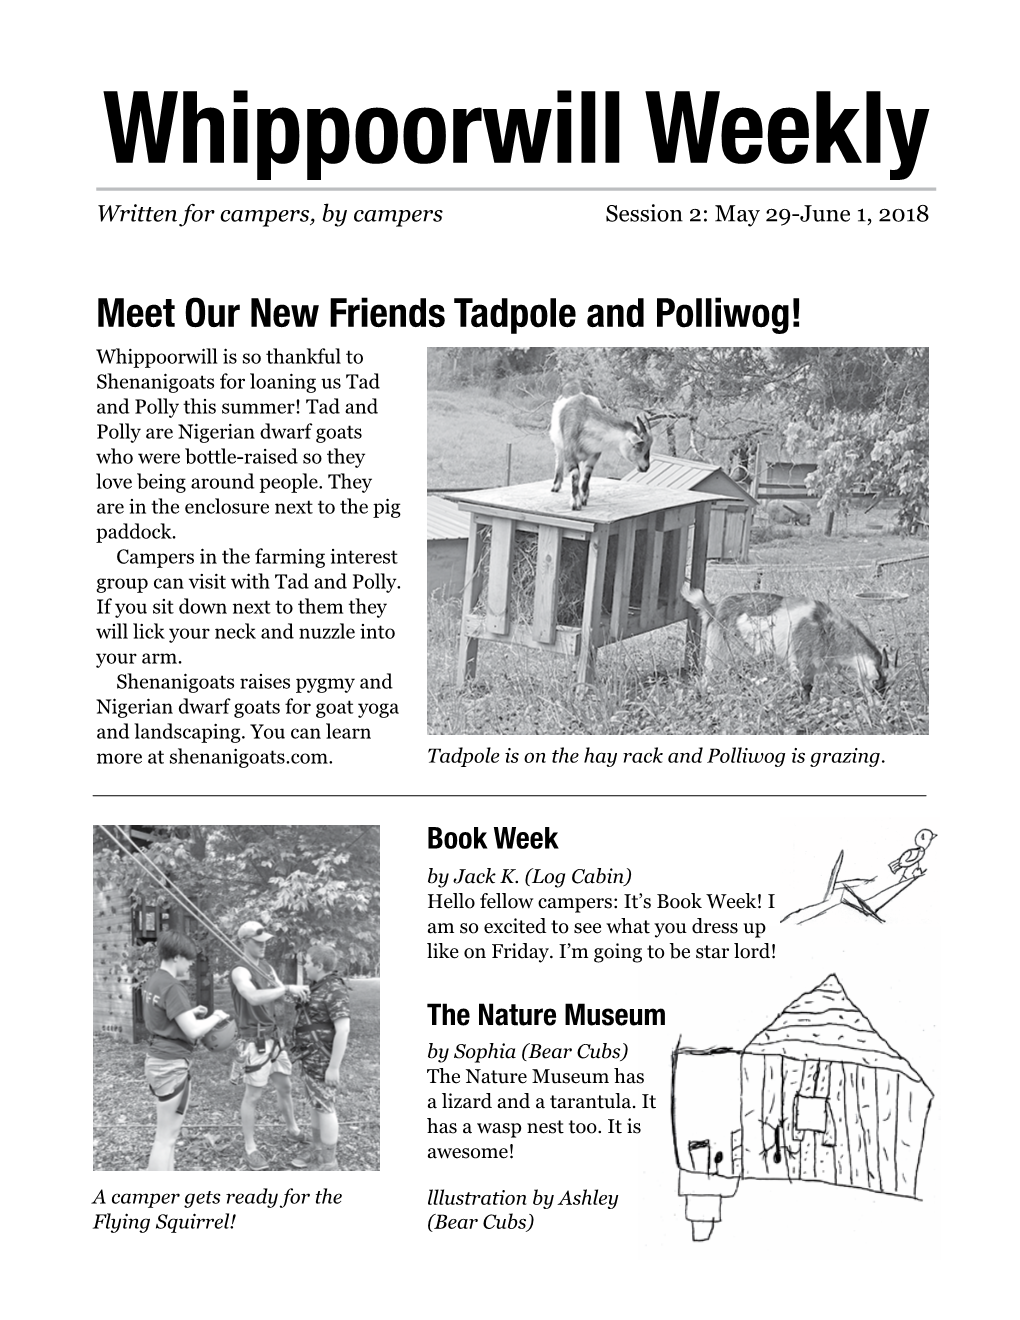 Whippoorwill Weekly Written for Campers, by Campers Session 2: May 29-June 1, 2018